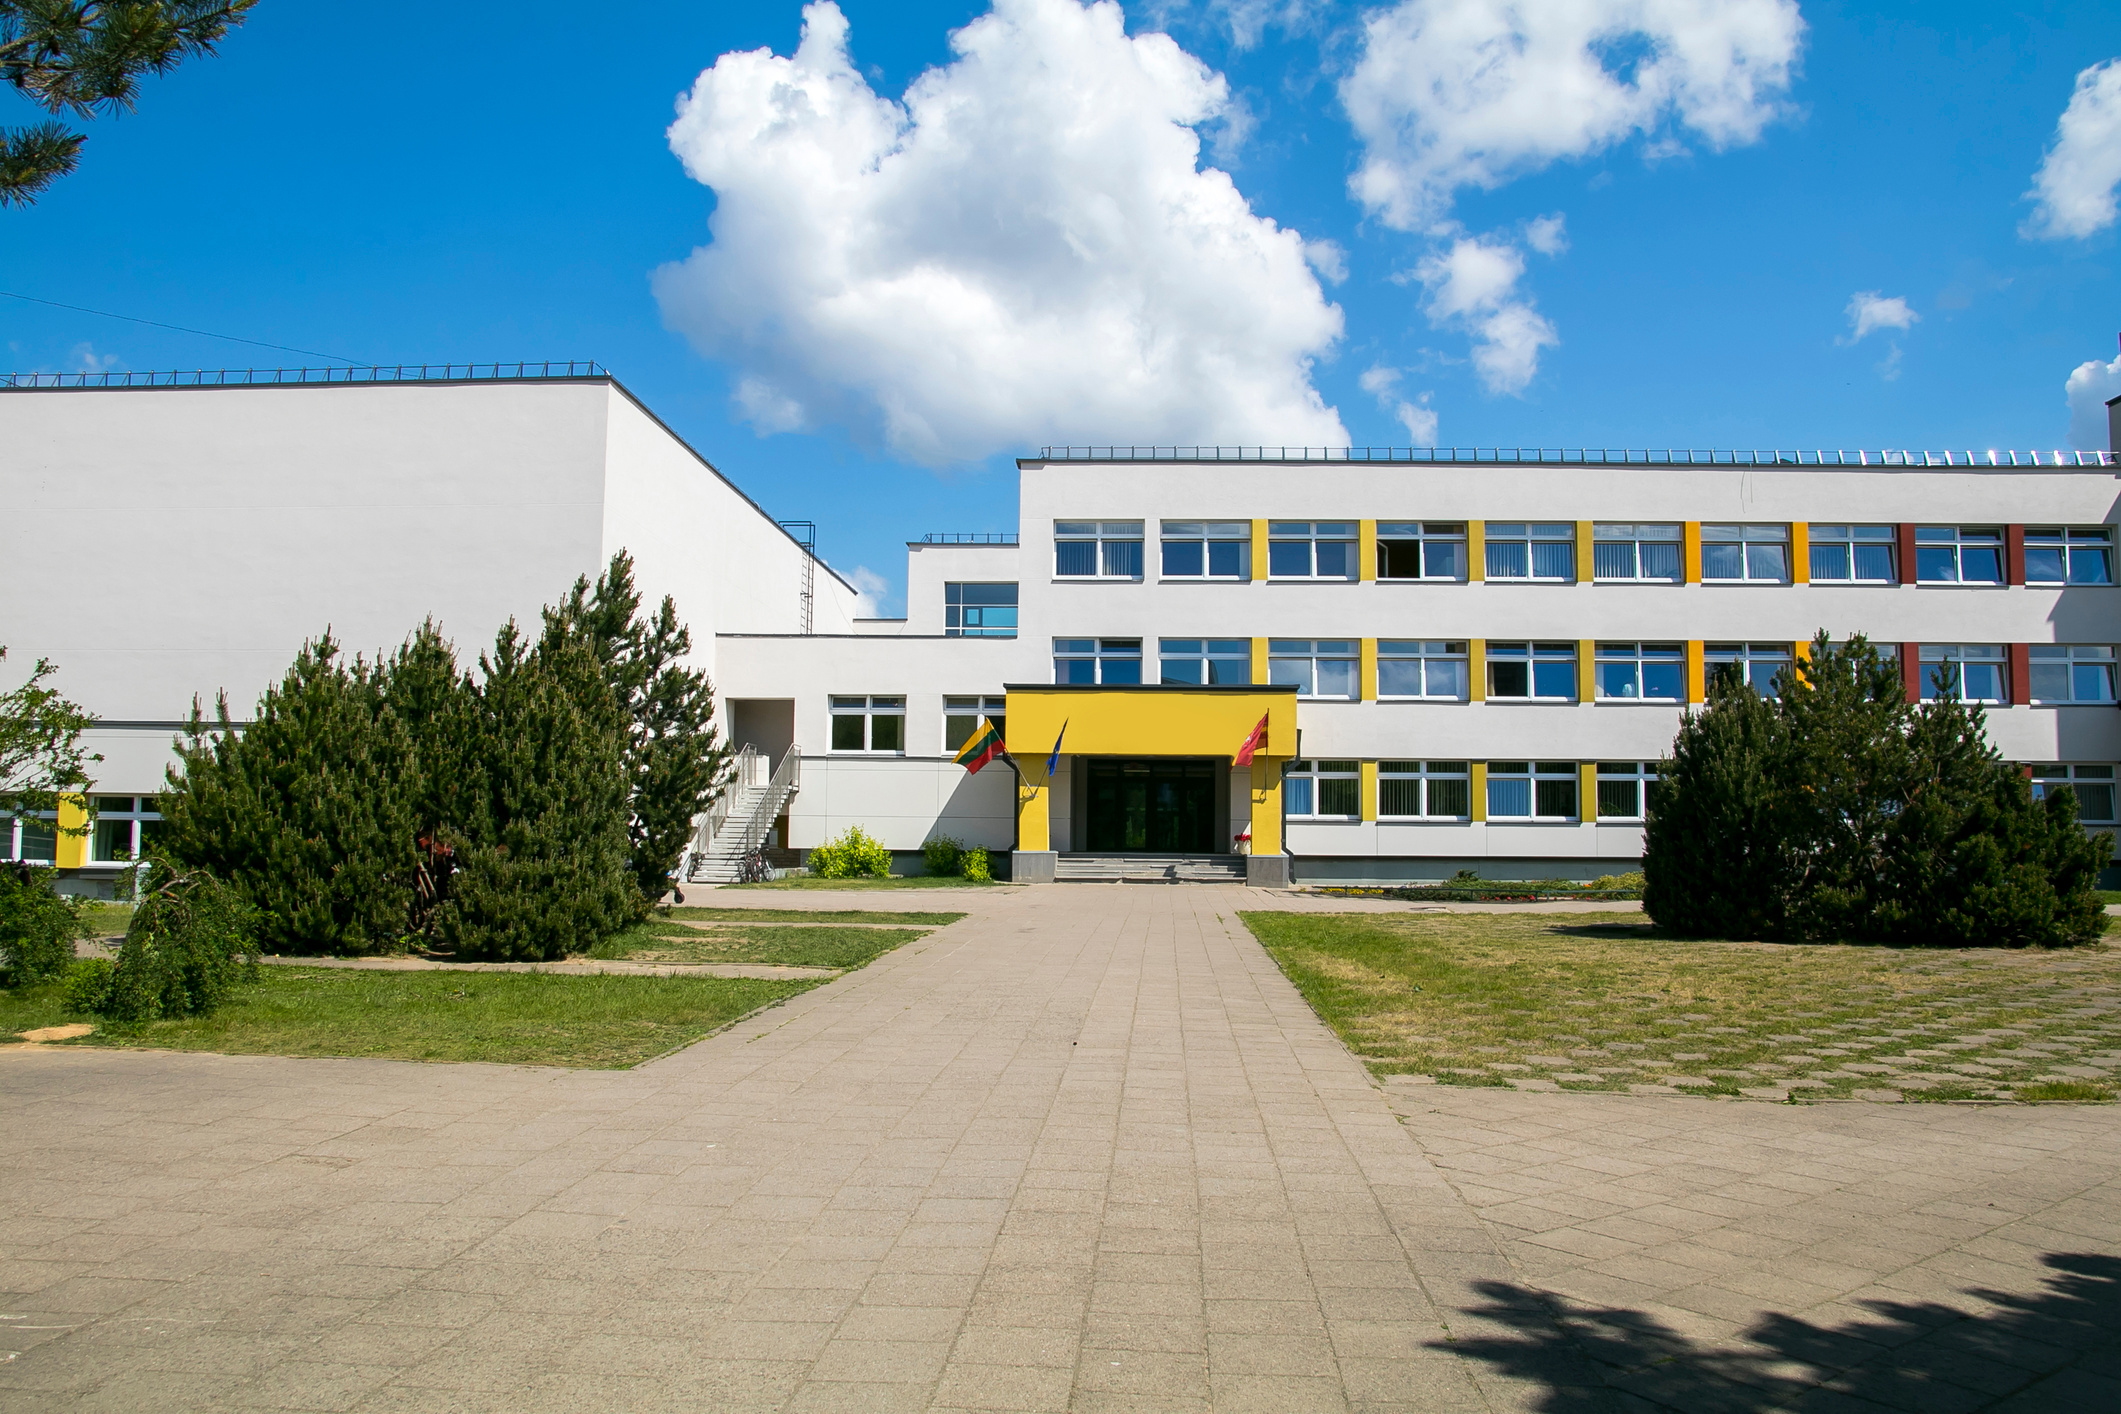 Public school building. Exterior view of school building with playground